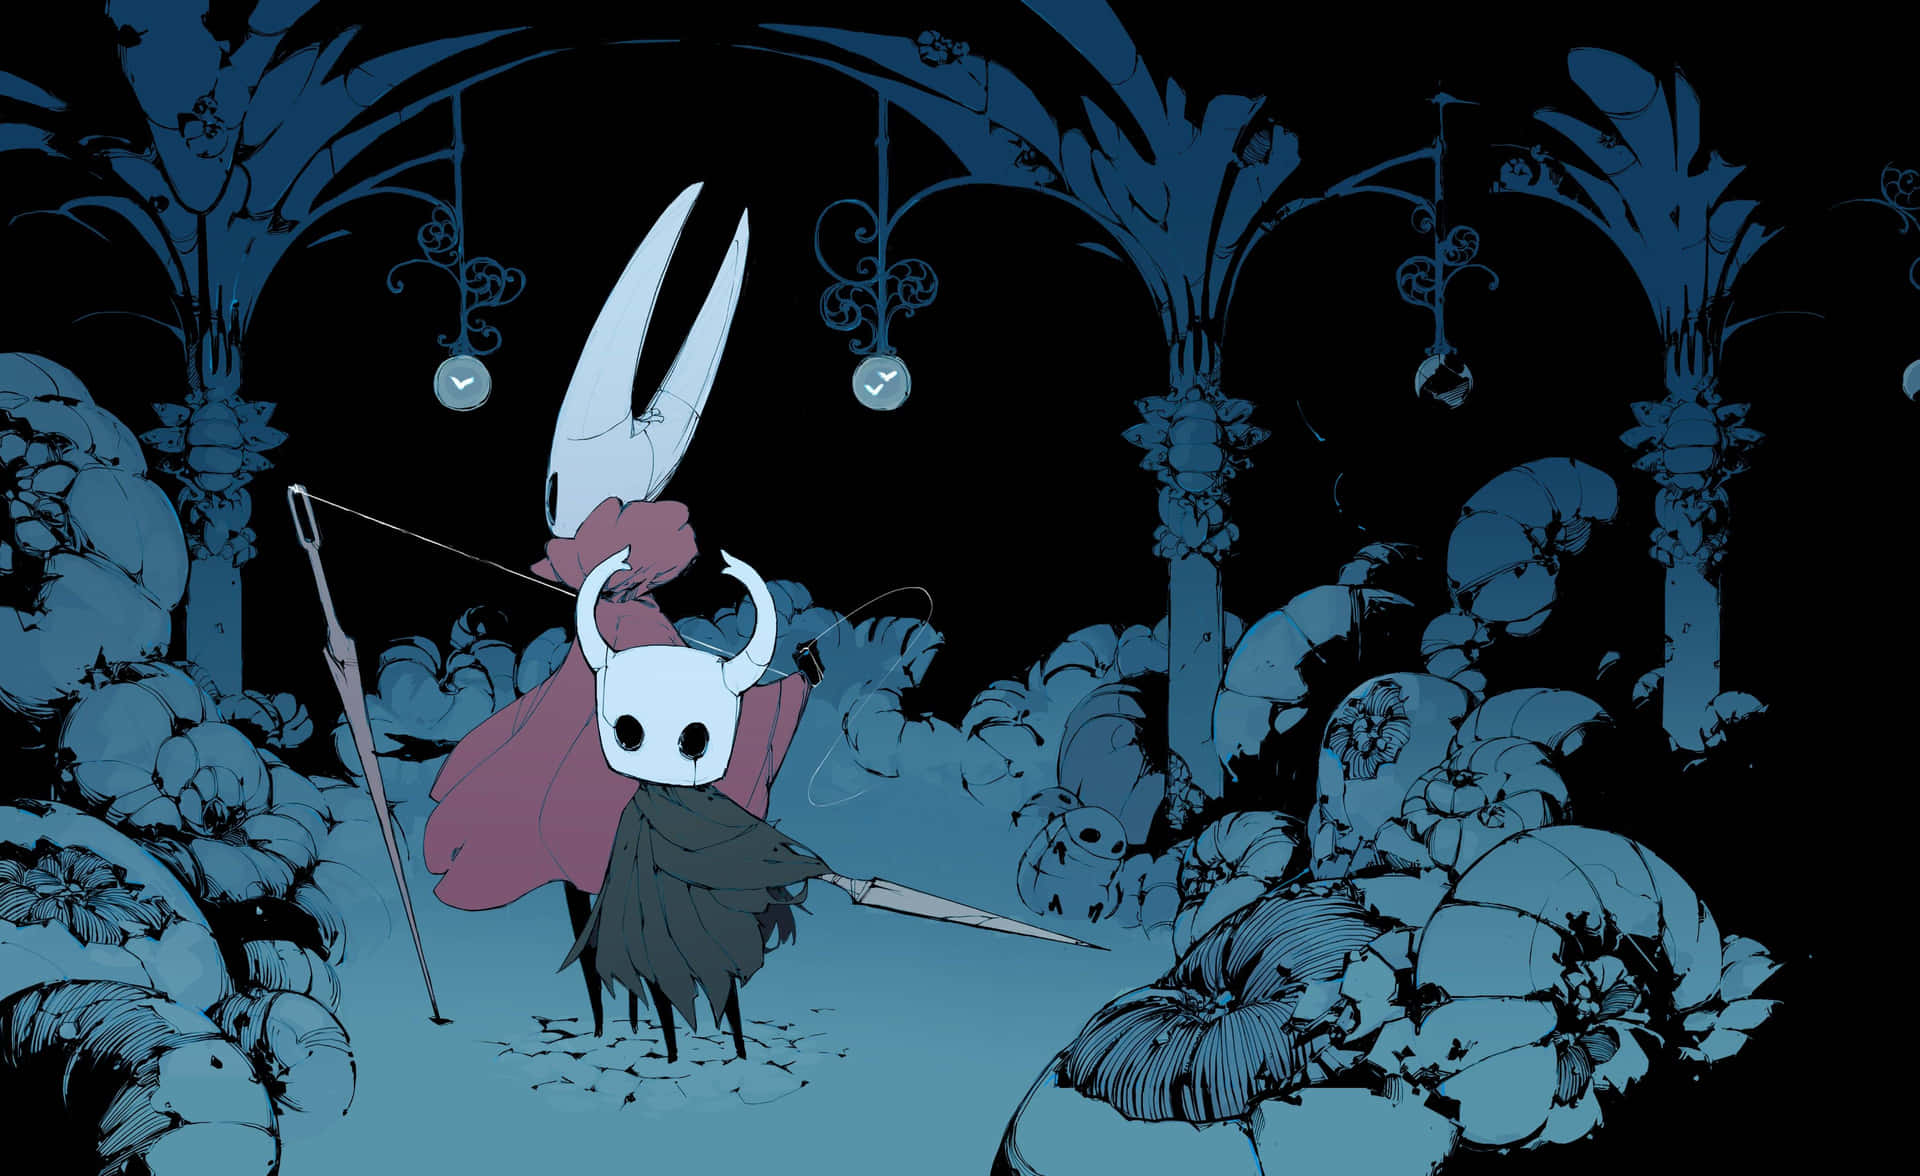 "Take on the world of Hollow Knight with this epic background!"